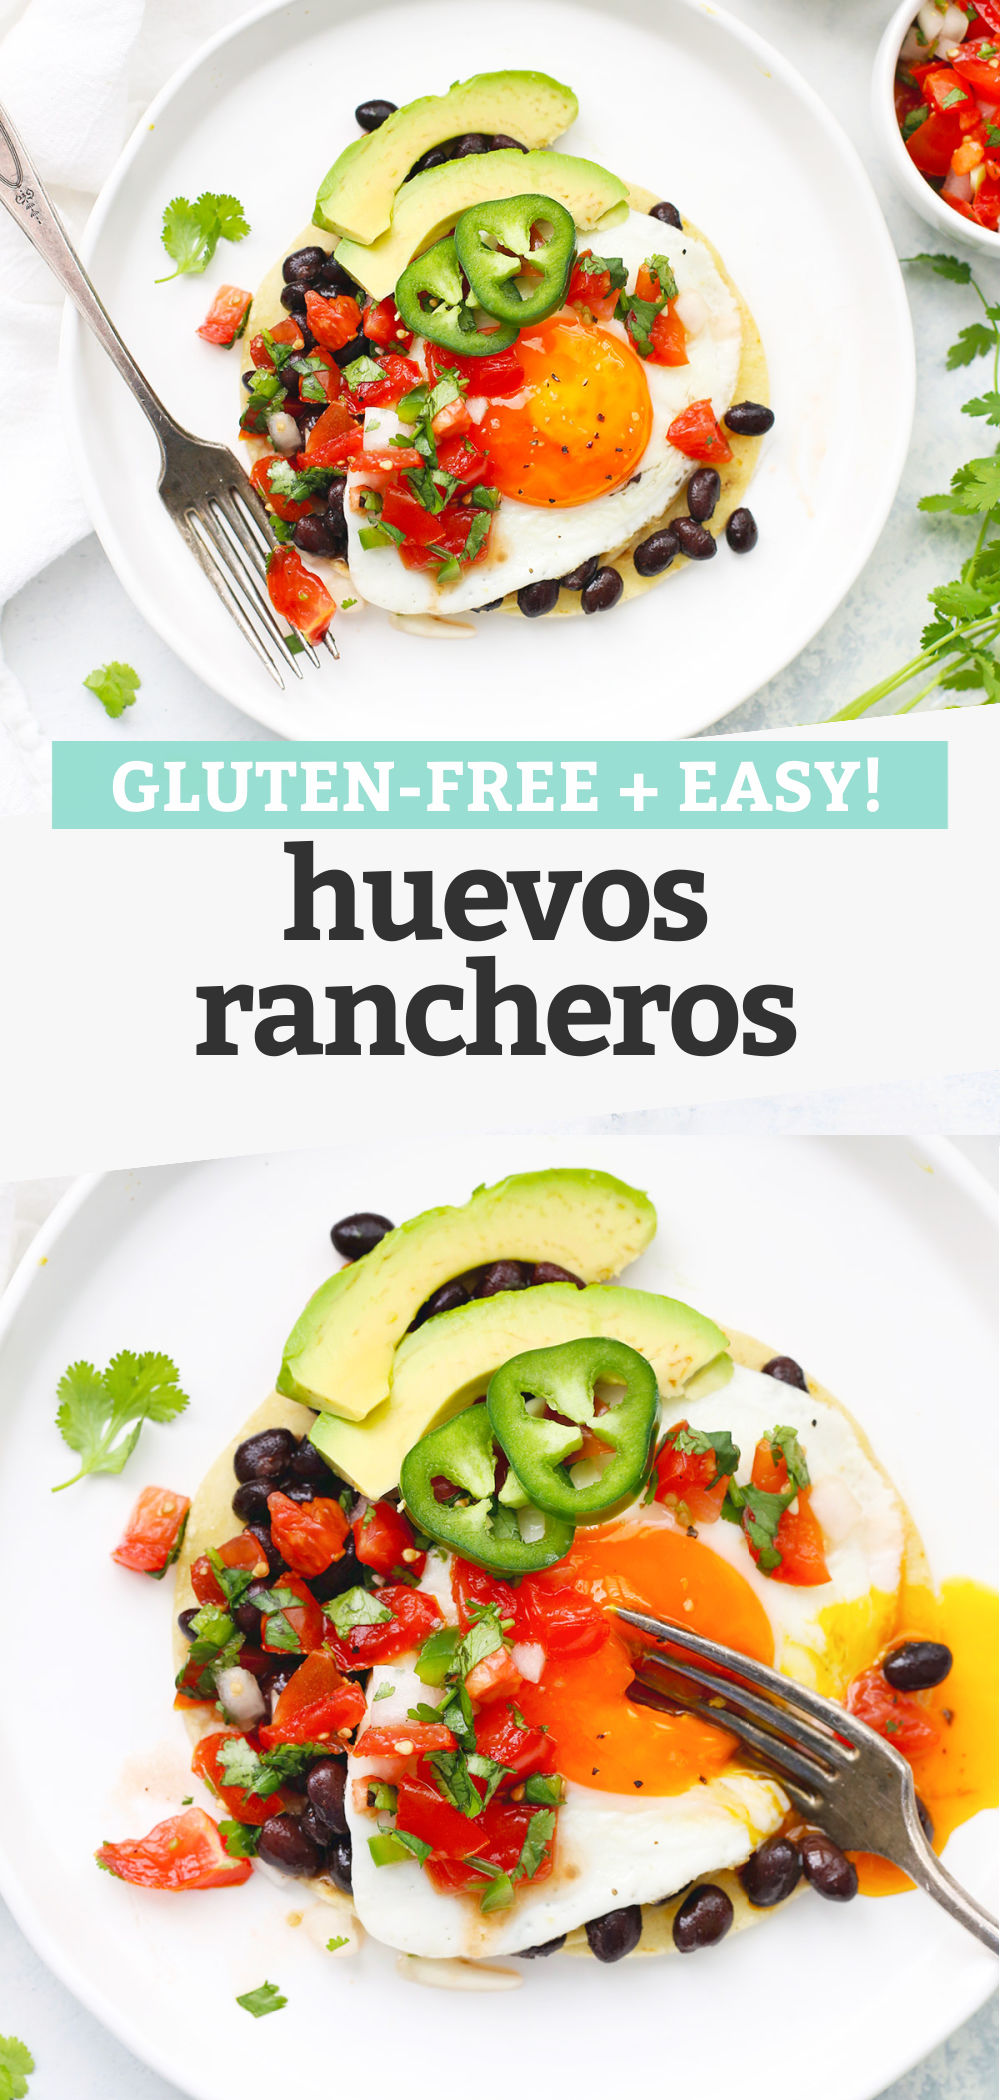 Collage of images of huevos rancheros with fresh pico de gallo with text overlay that reads "gluten-free + easy huevos rancheros"